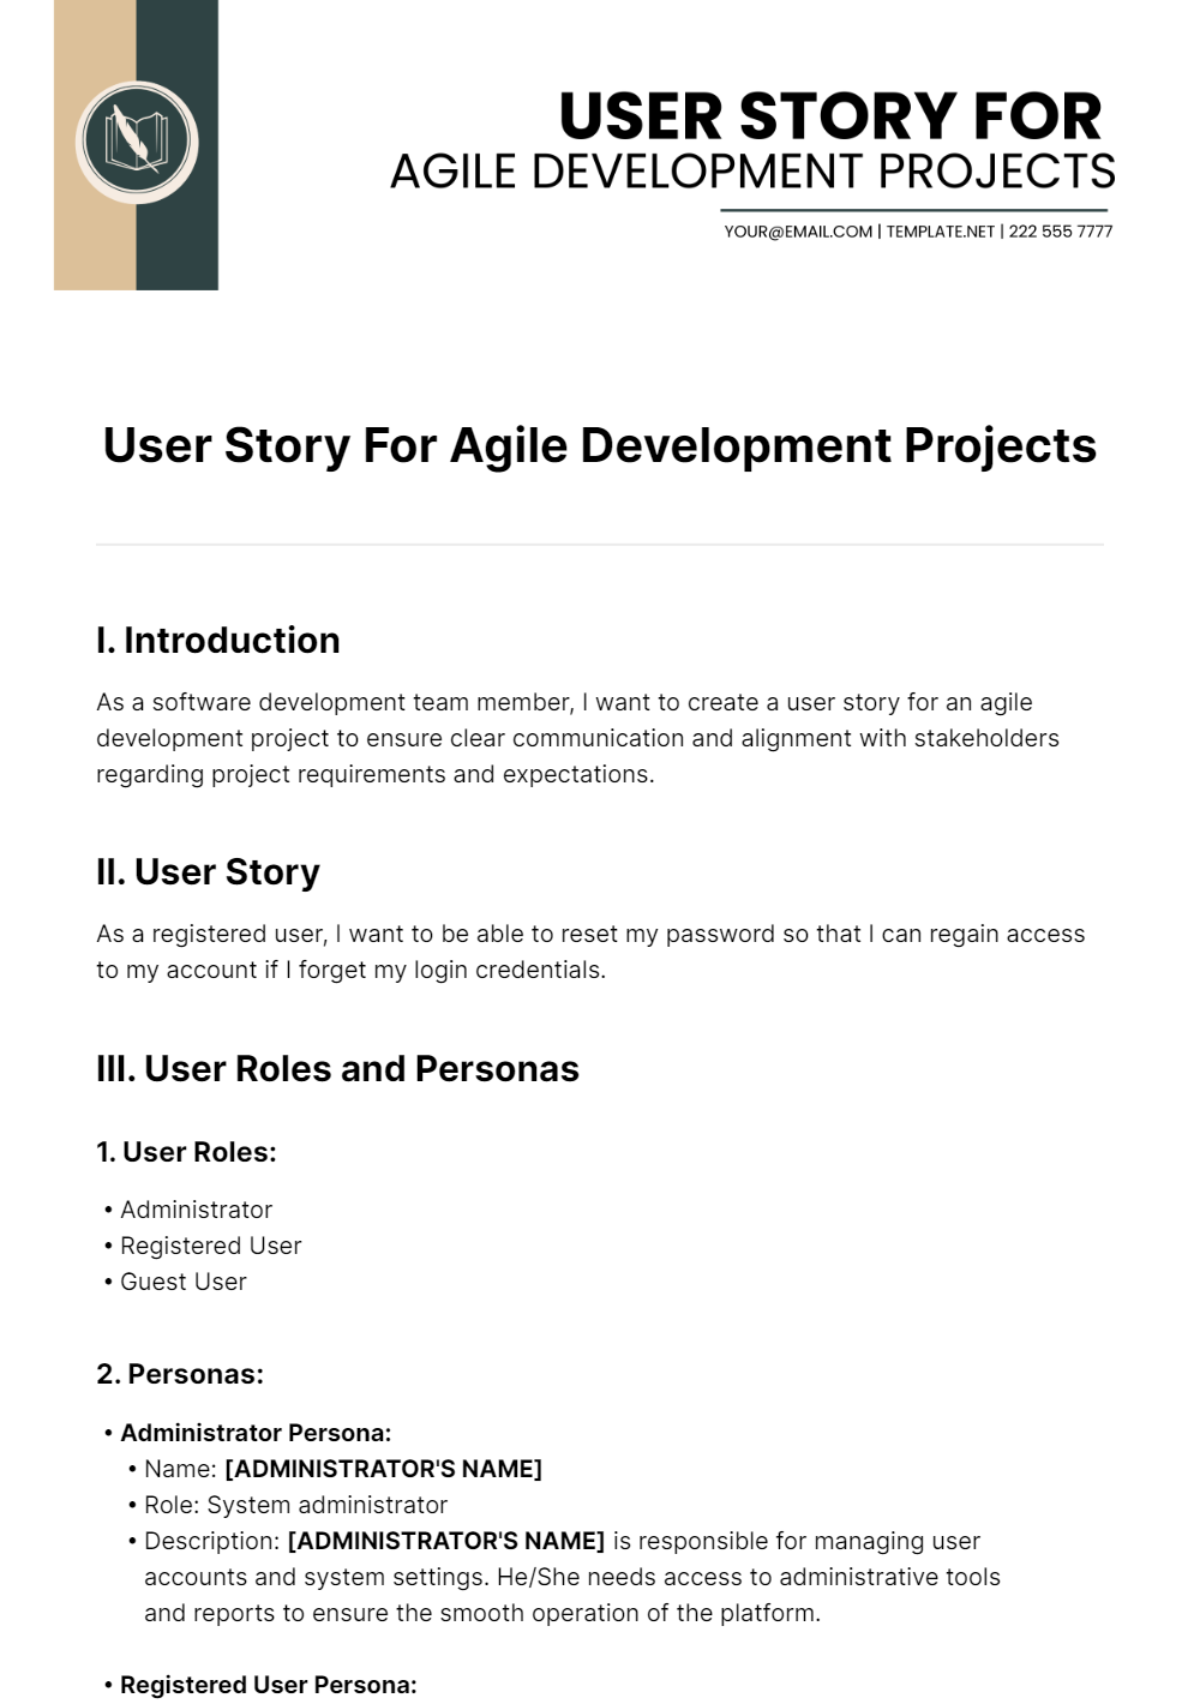 Free User Story For Agile Development Projects Template